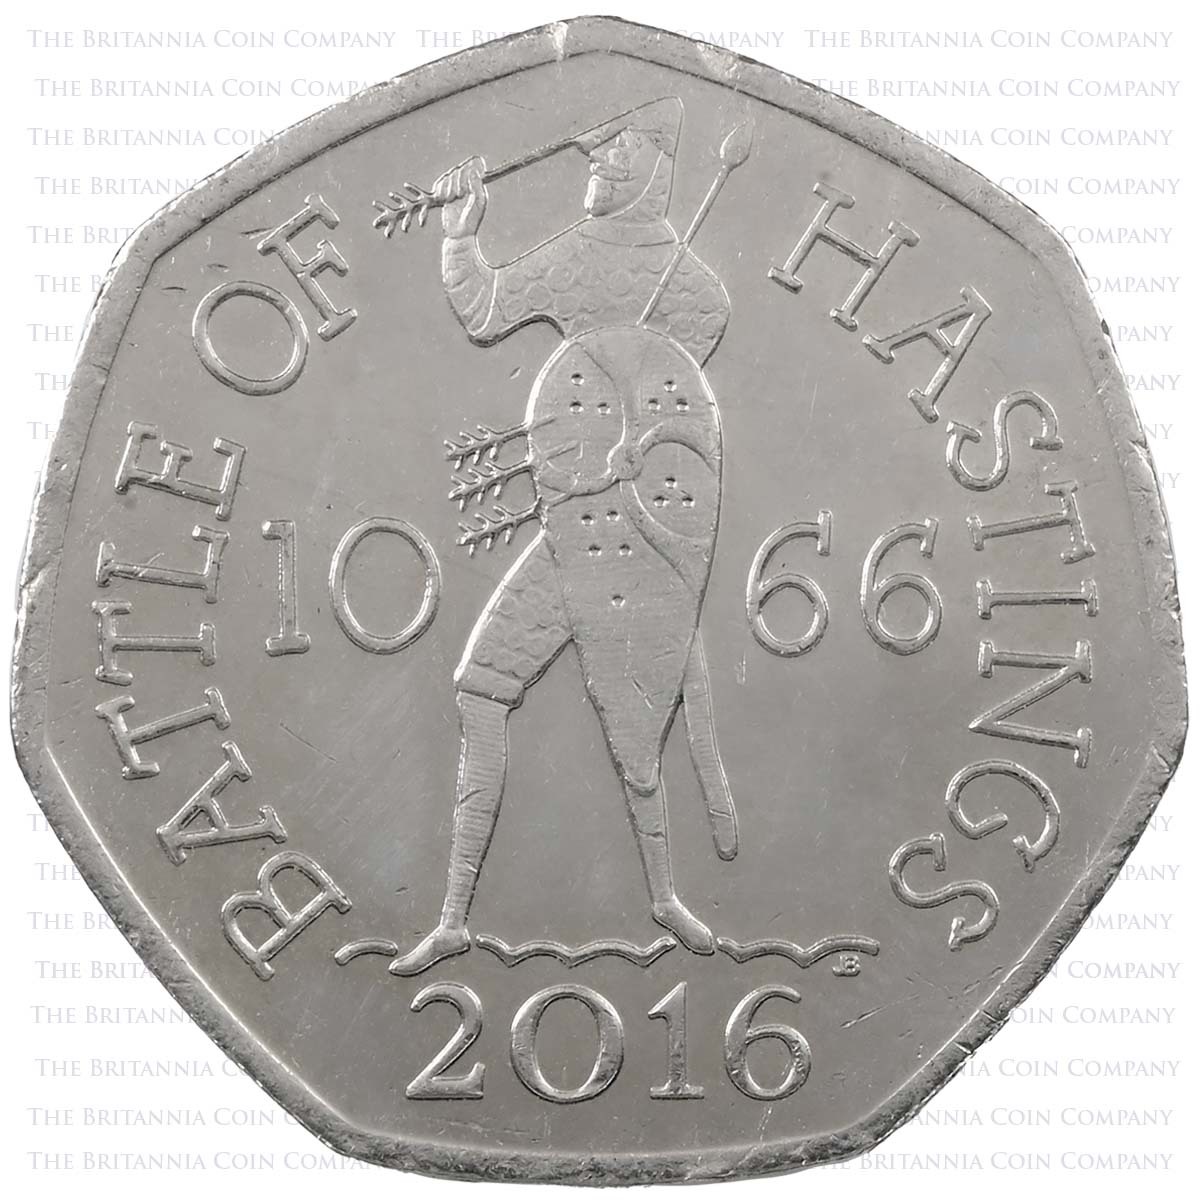 2016 Battle Of Hastings 1066 Circulated Fifty Pence Coin Reverse